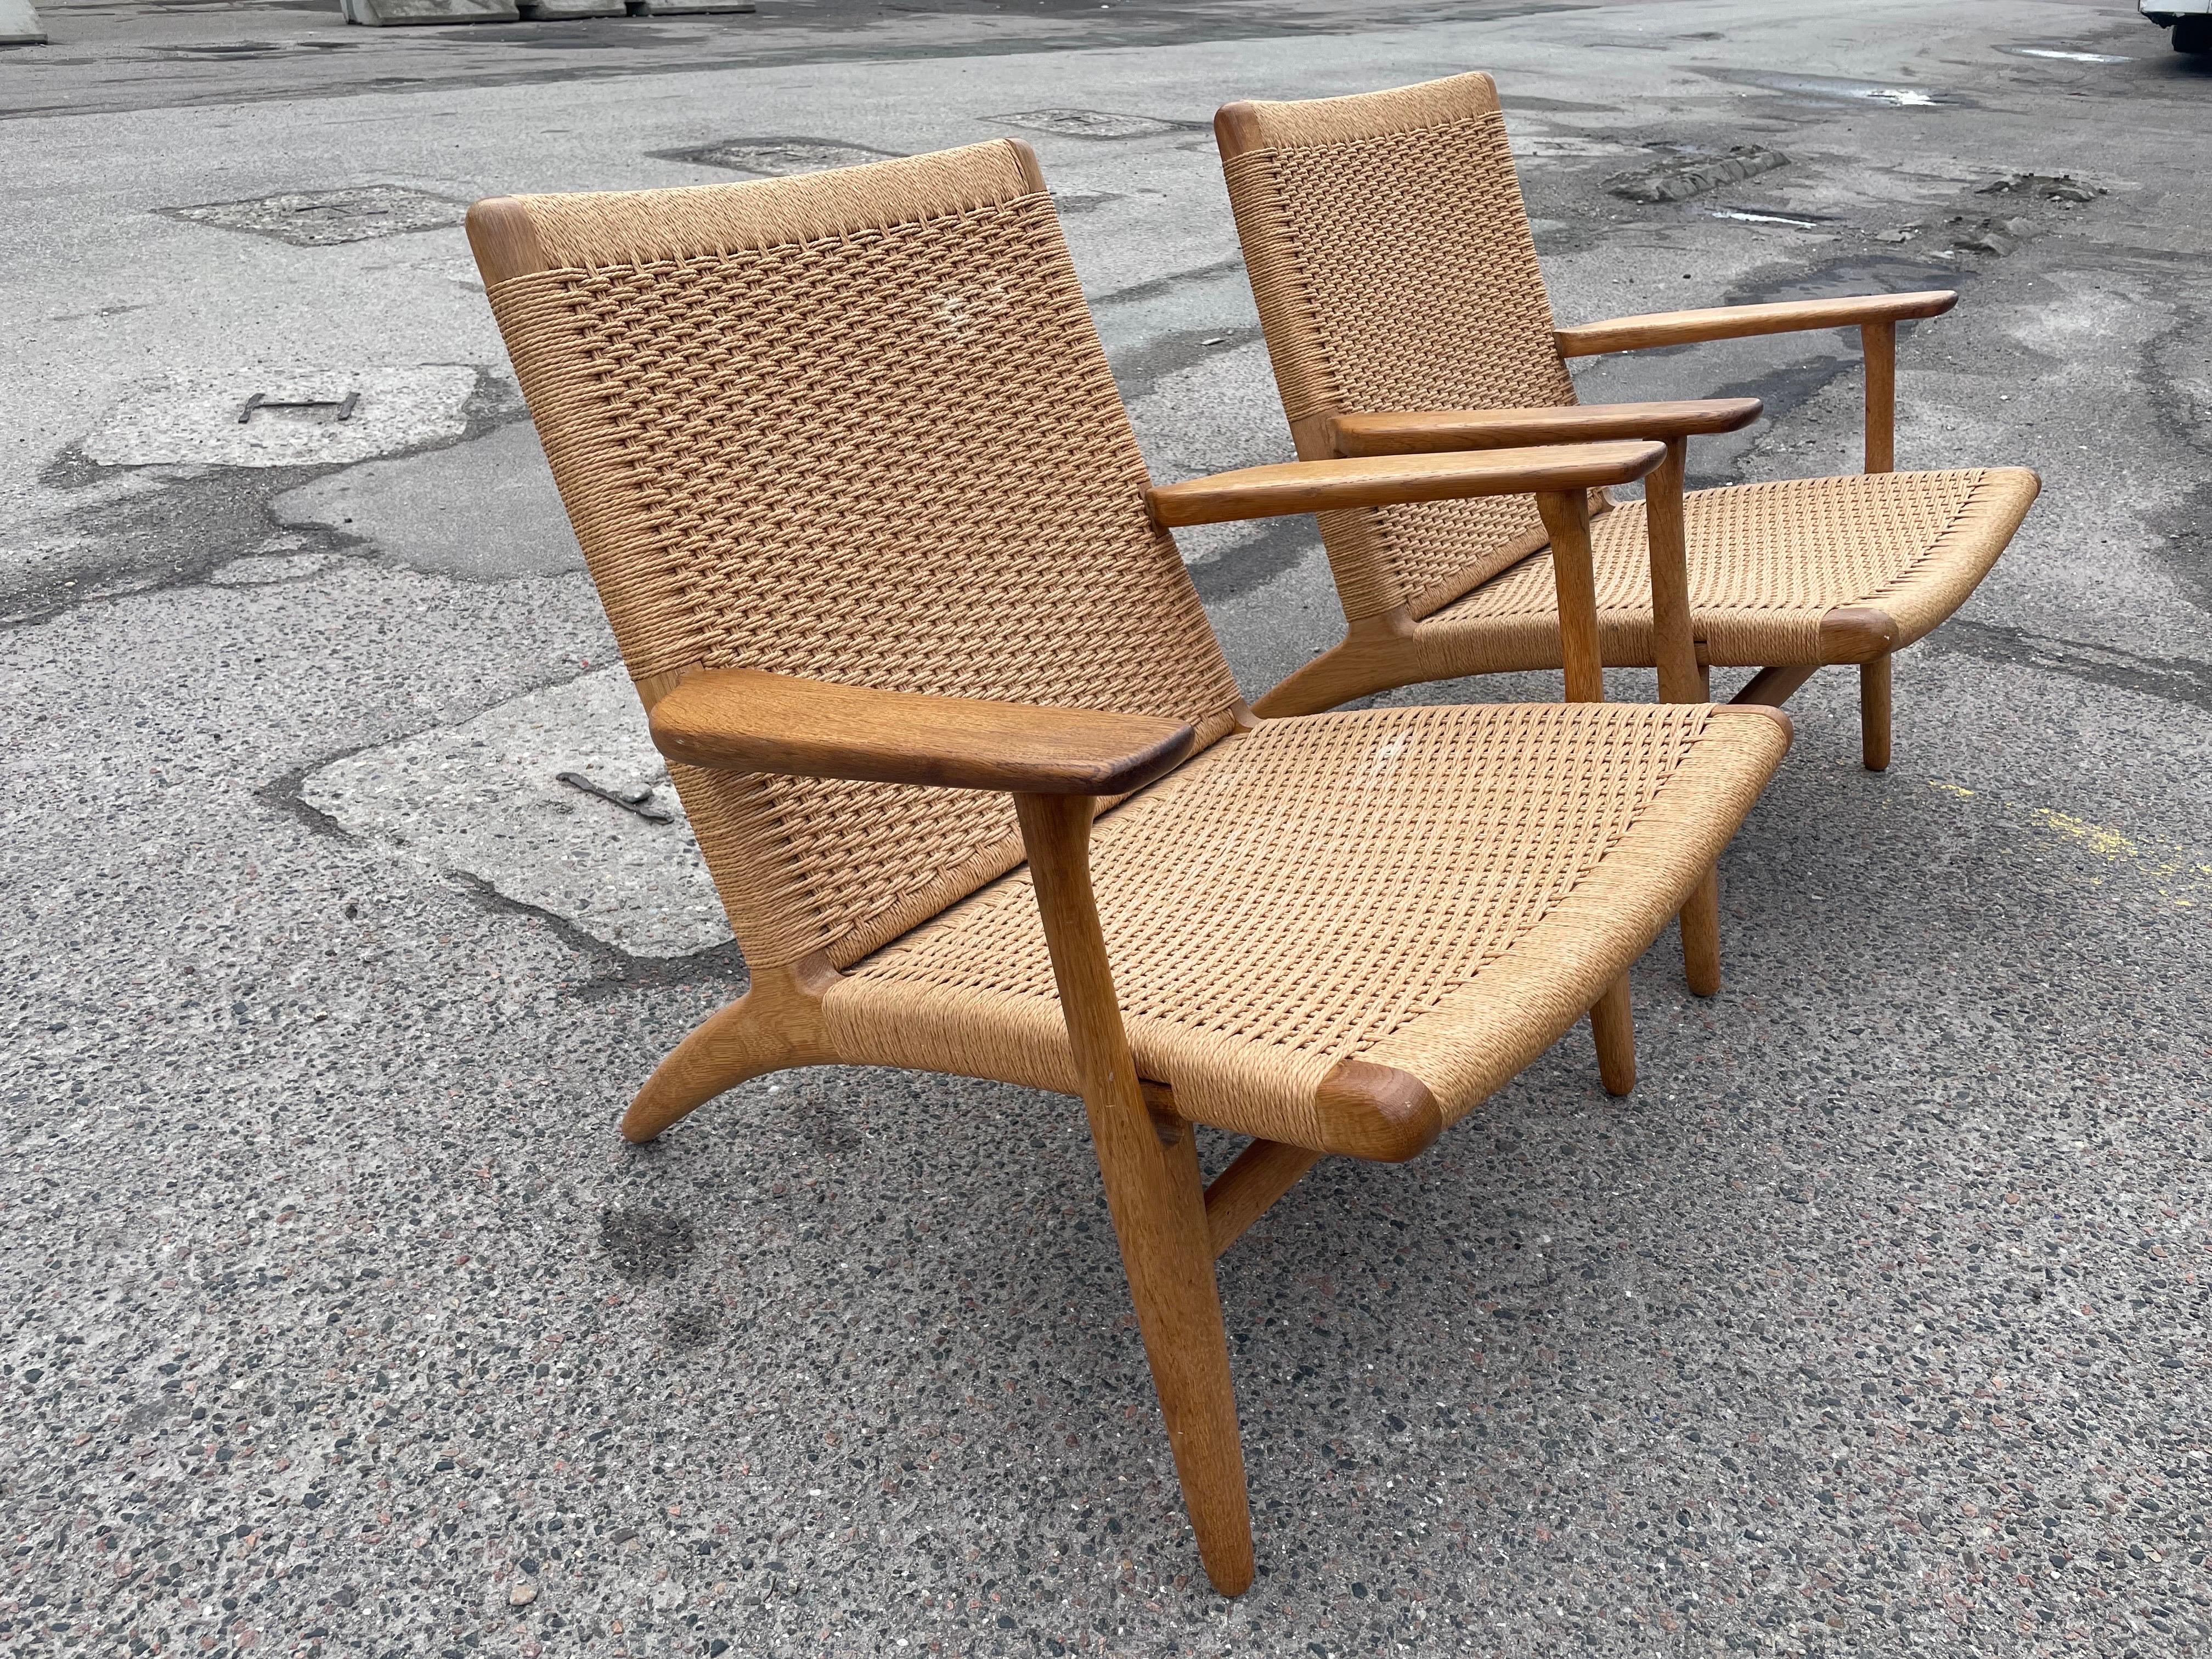 Introducing a rare opportunity to own a true piece of design history - a pair of CH25 lounge chairs by renowned Danish designer, Hans Wegner. These chairs are the epitome of Mid-Century Modern design, and are highly sought after by collectors and